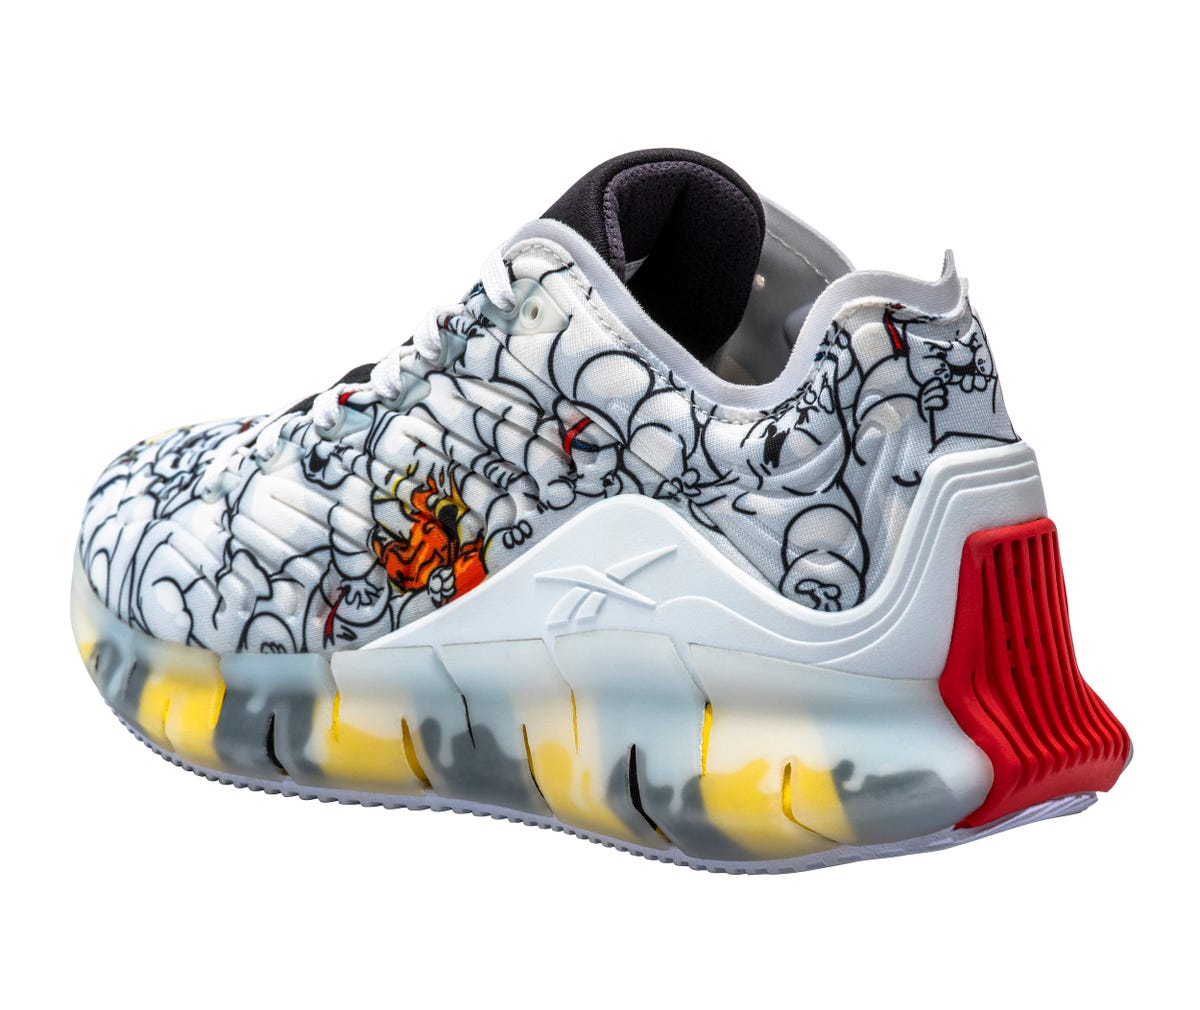 Reebok drops second Ghostbusters collection.